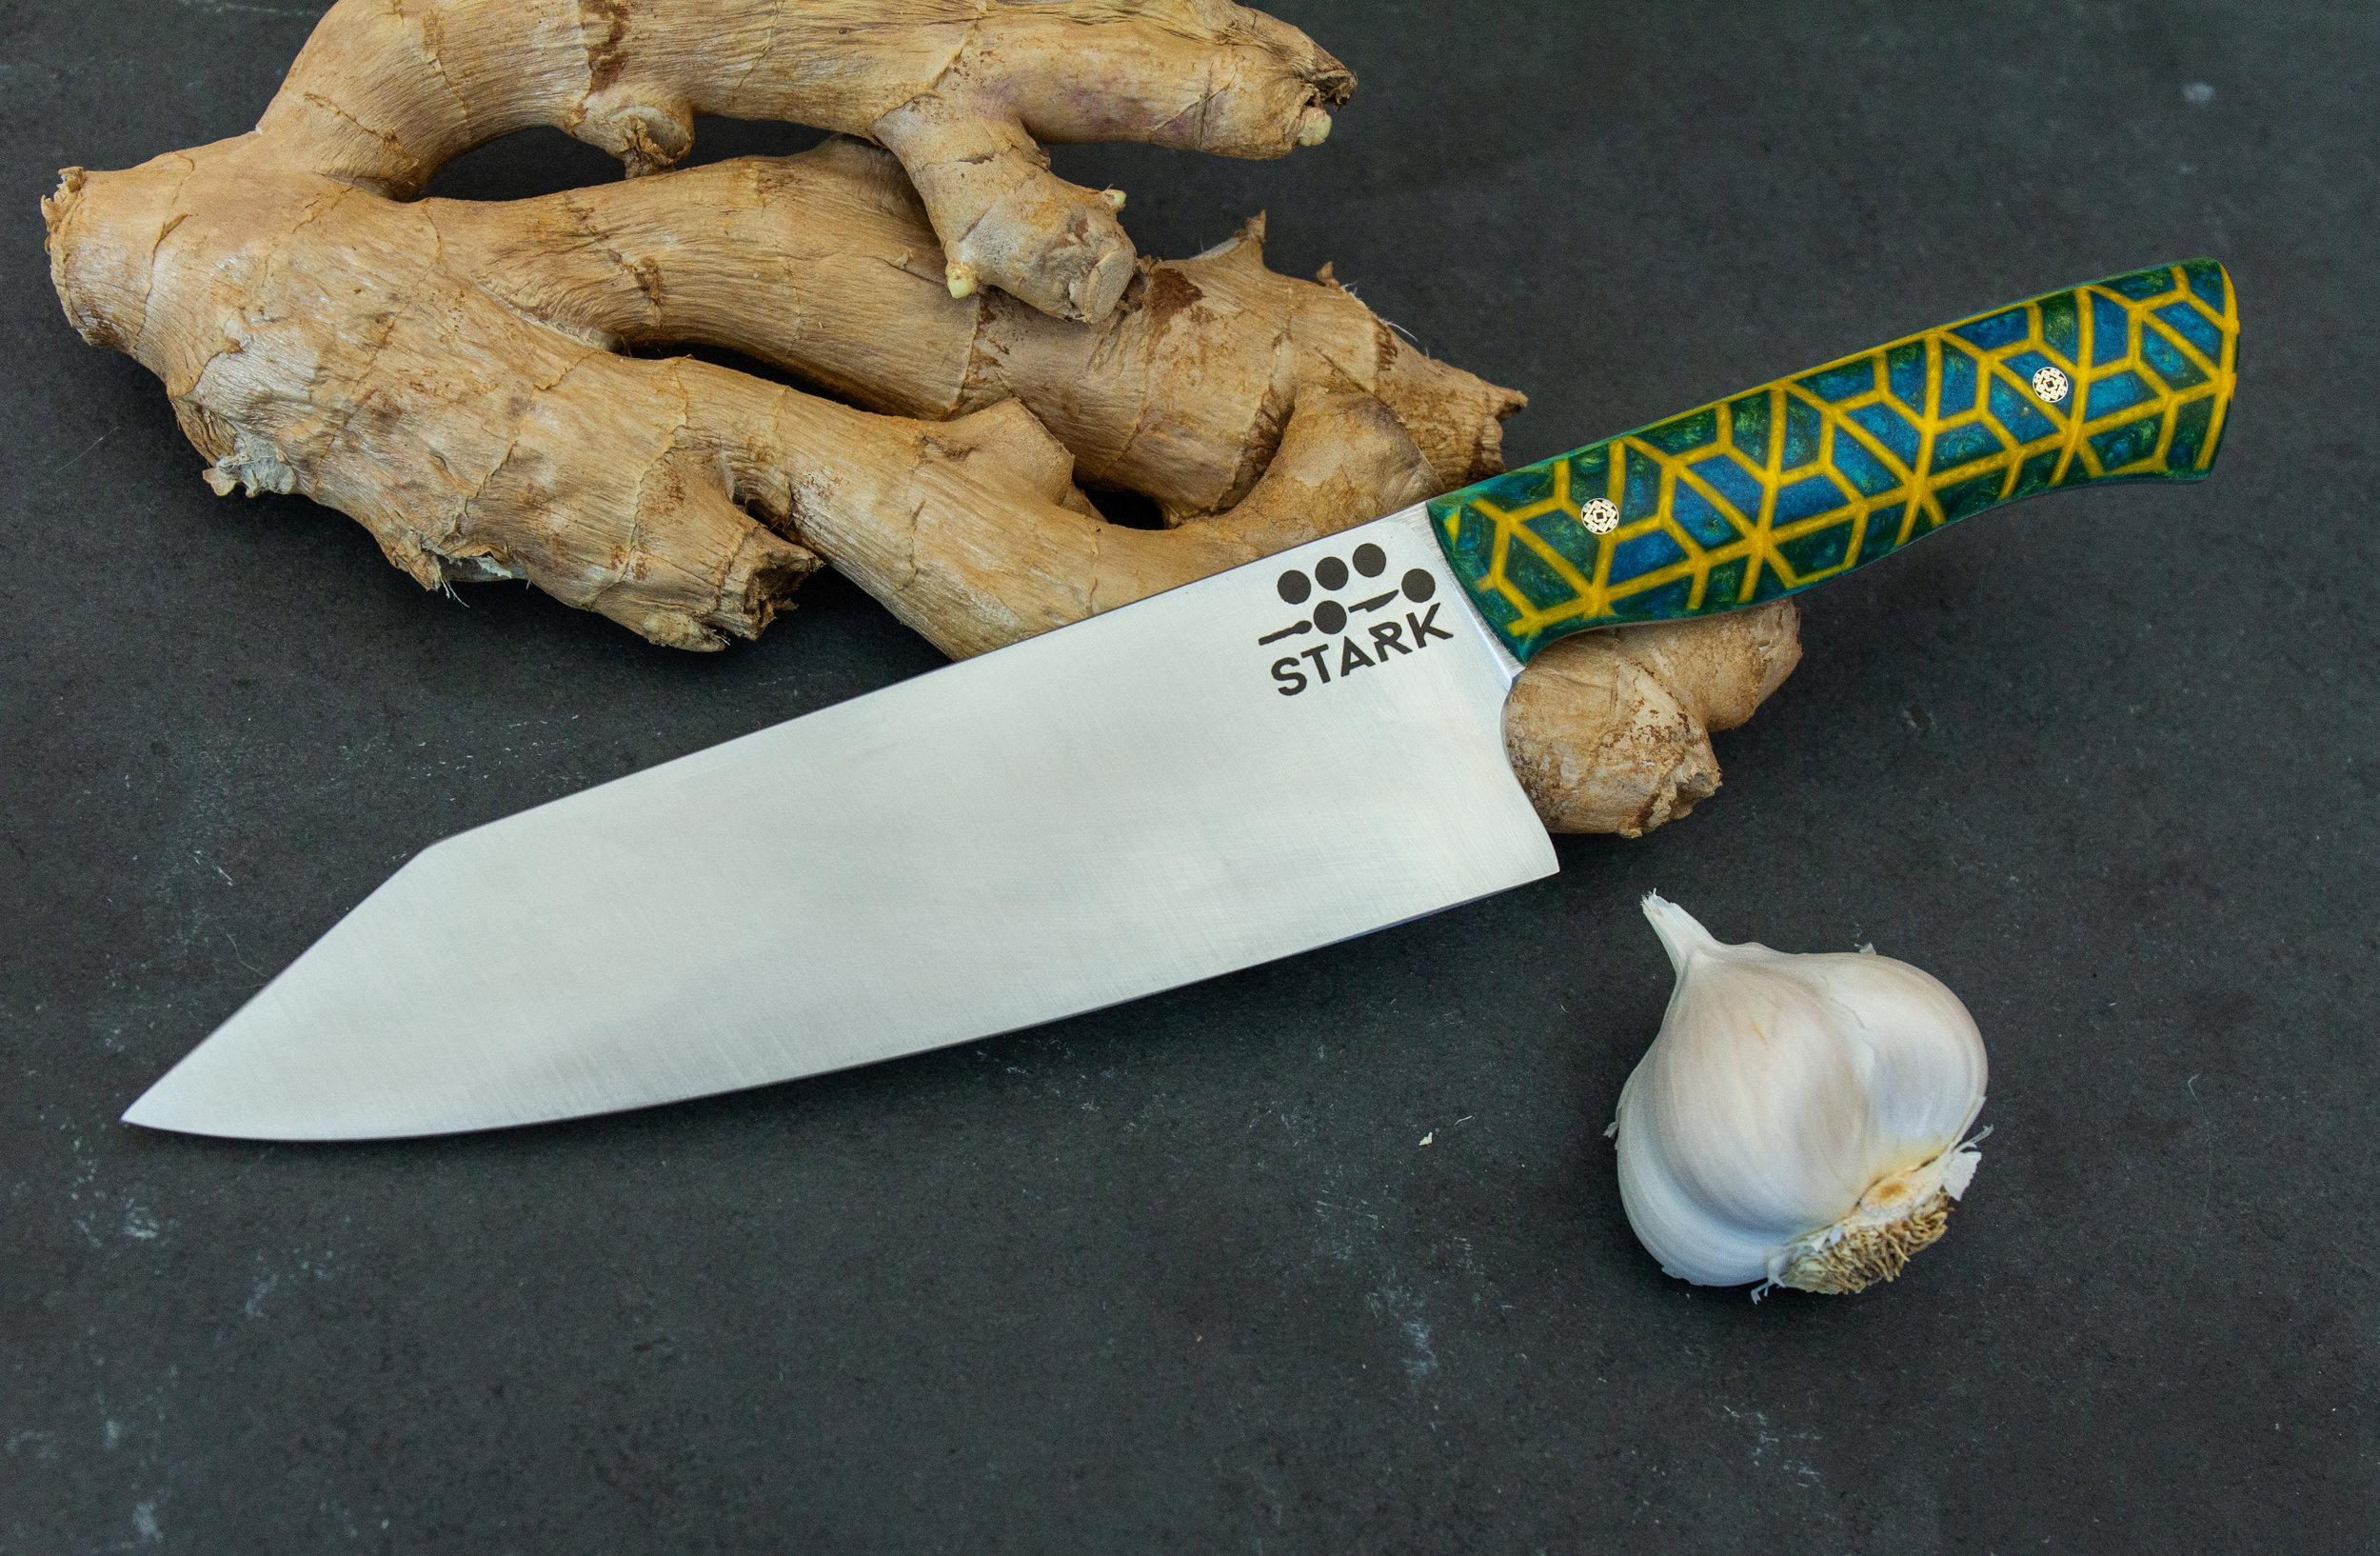 20190224_4_teal-yellow-hex-chefs-knife.jpg